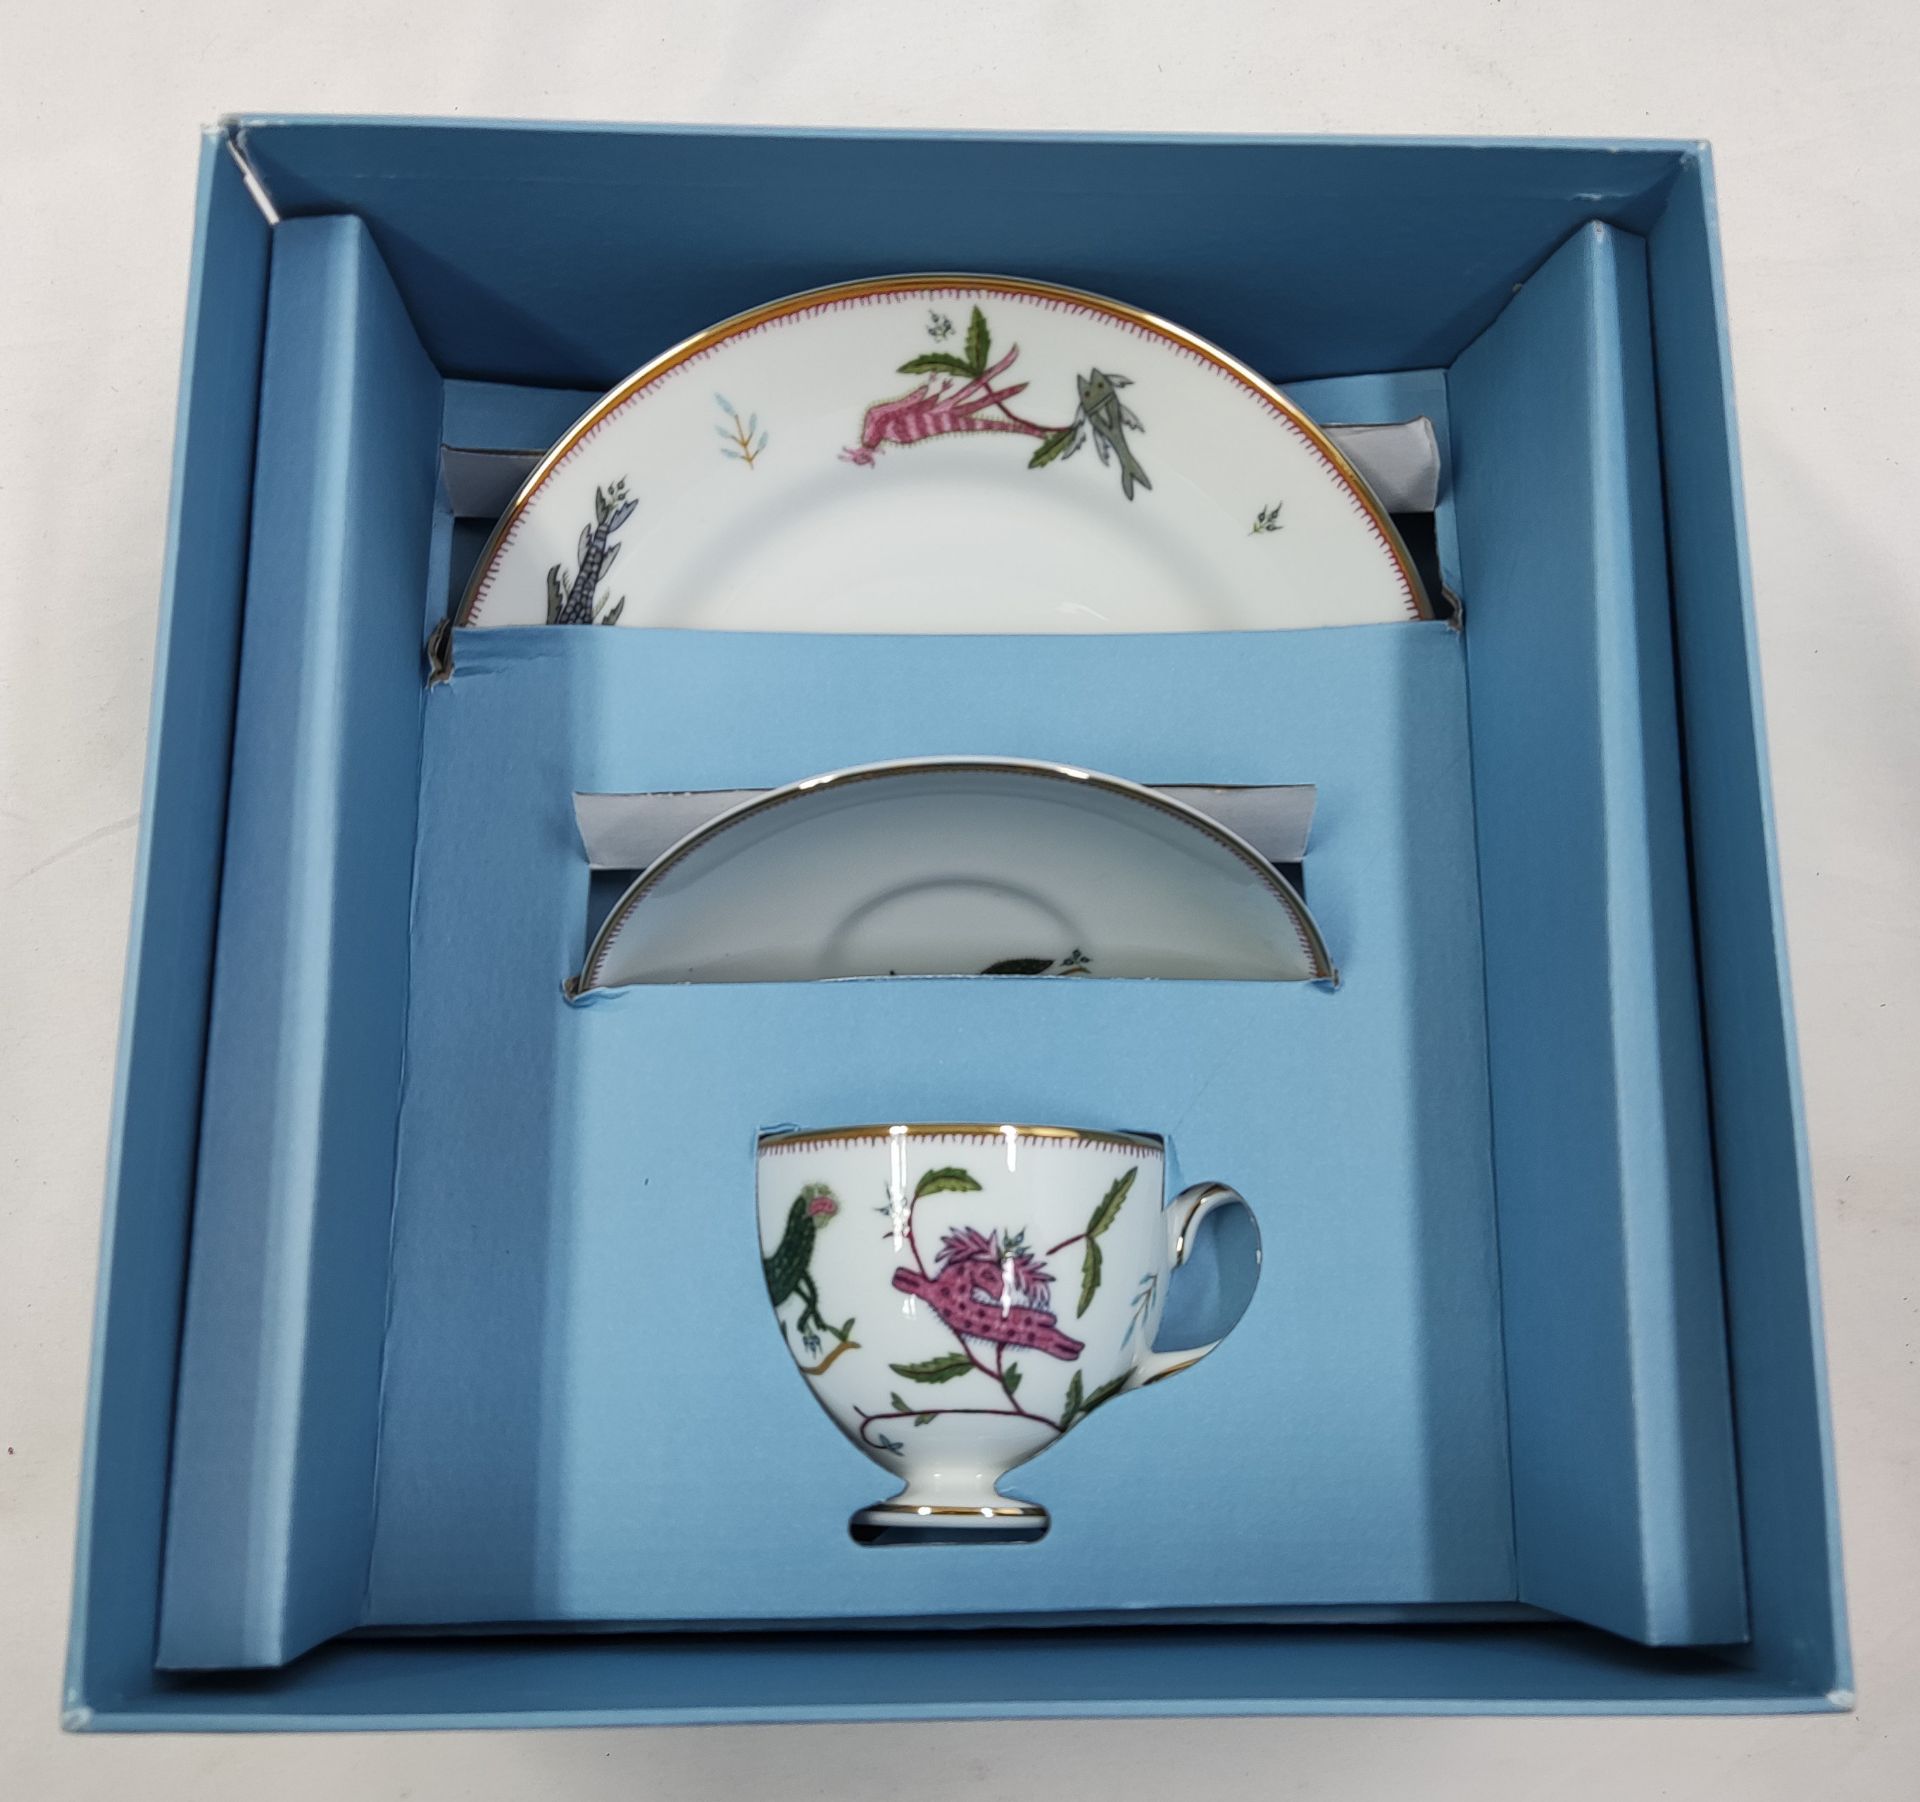 1 x WEDGWOOD Mythical Creatures Fine Bone China Teacup/Saucer/Plate Set - New/Boxed - RRP £140.00 - Bild 16 aus 20